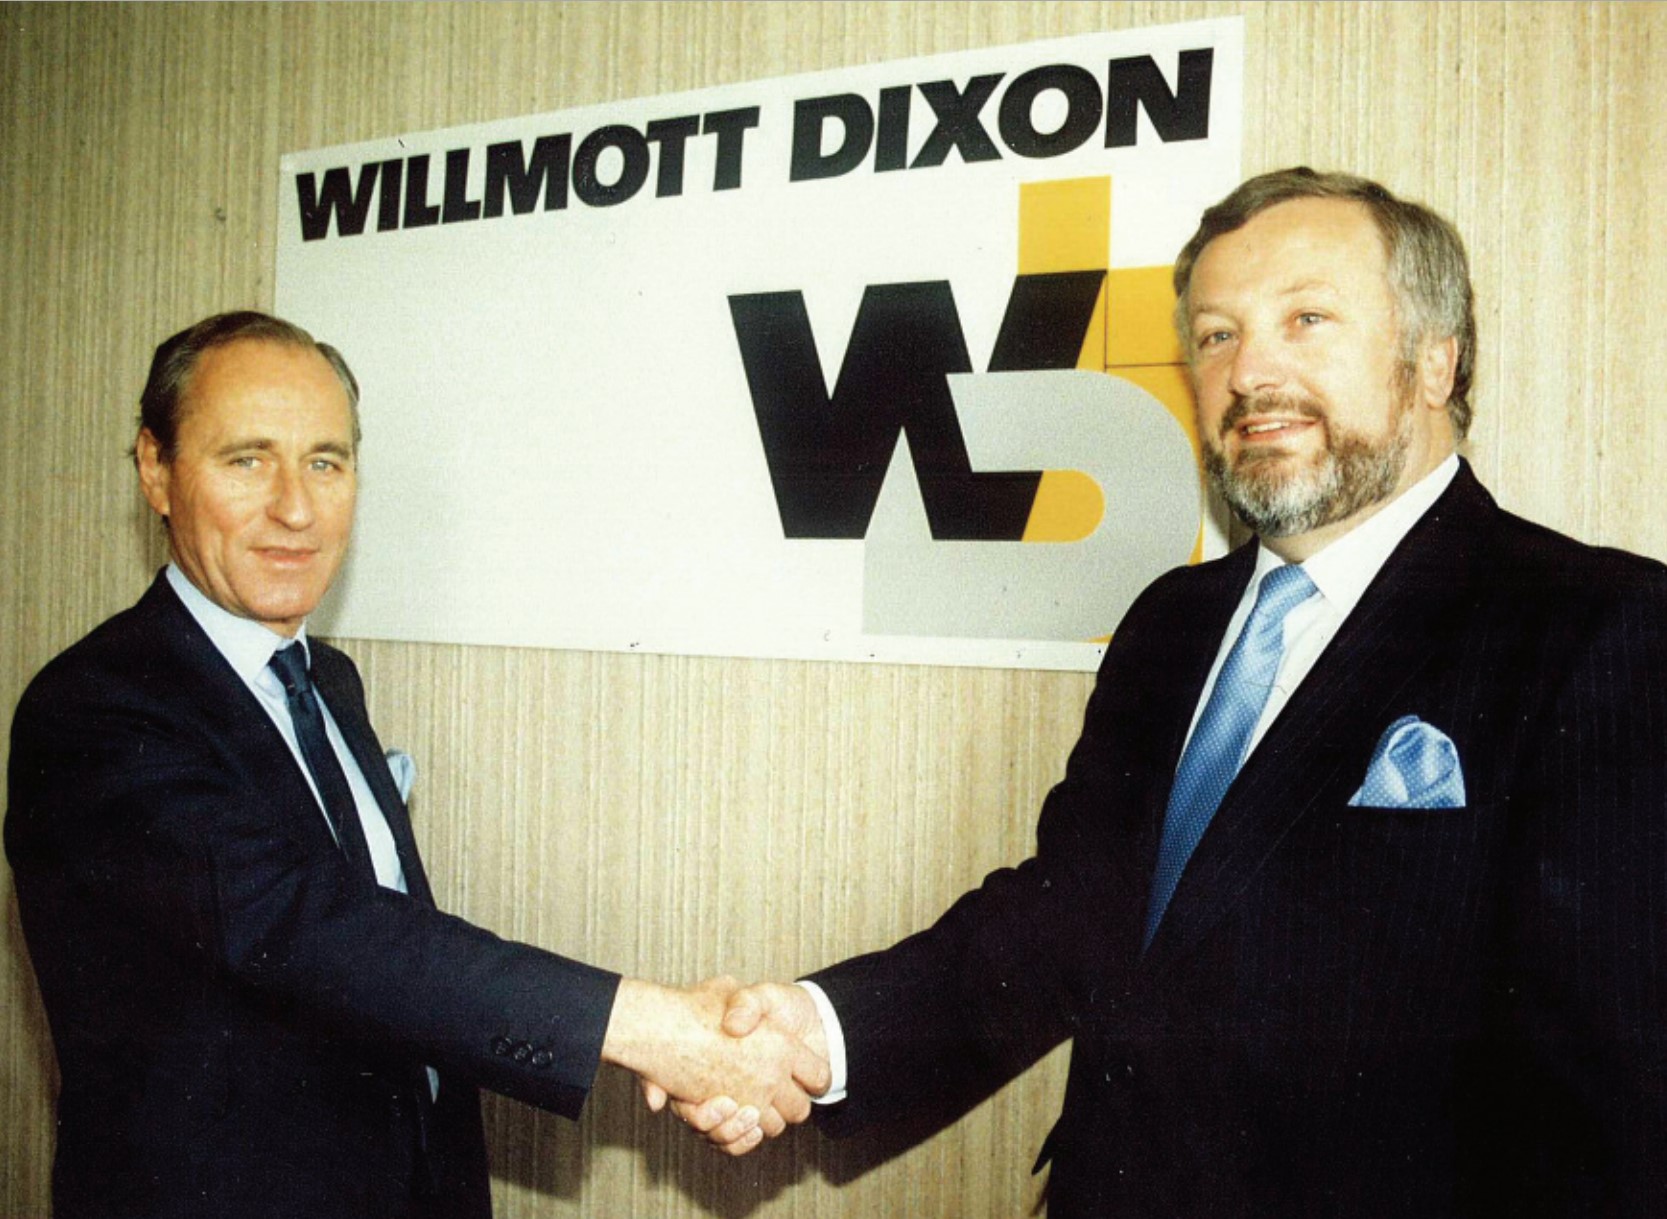 Peter Willmott and Sir Ian Dixon shake hands on the creation of the
Willmott Dixon name.